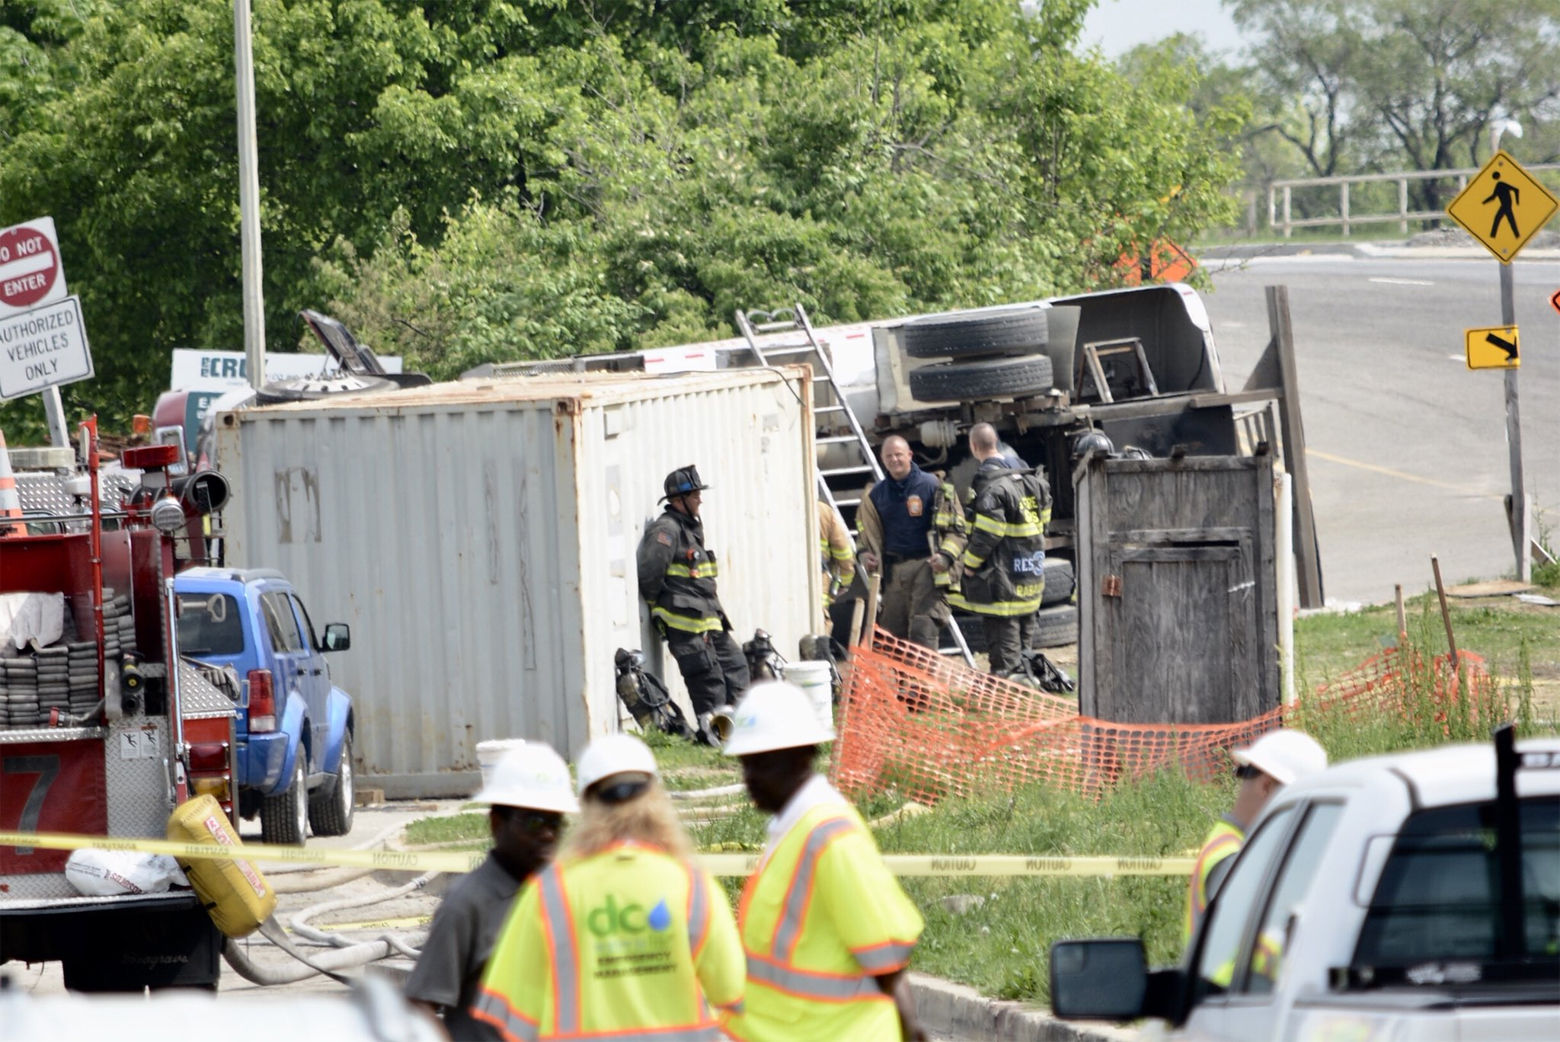 The overturned tanker on South Capitol Street near the Suitland Parkway was carrying about 1,700 gallons of diesel when it overturned. About 500 gallons spilled, fire officials said. (WTOP/Dave Dildine)